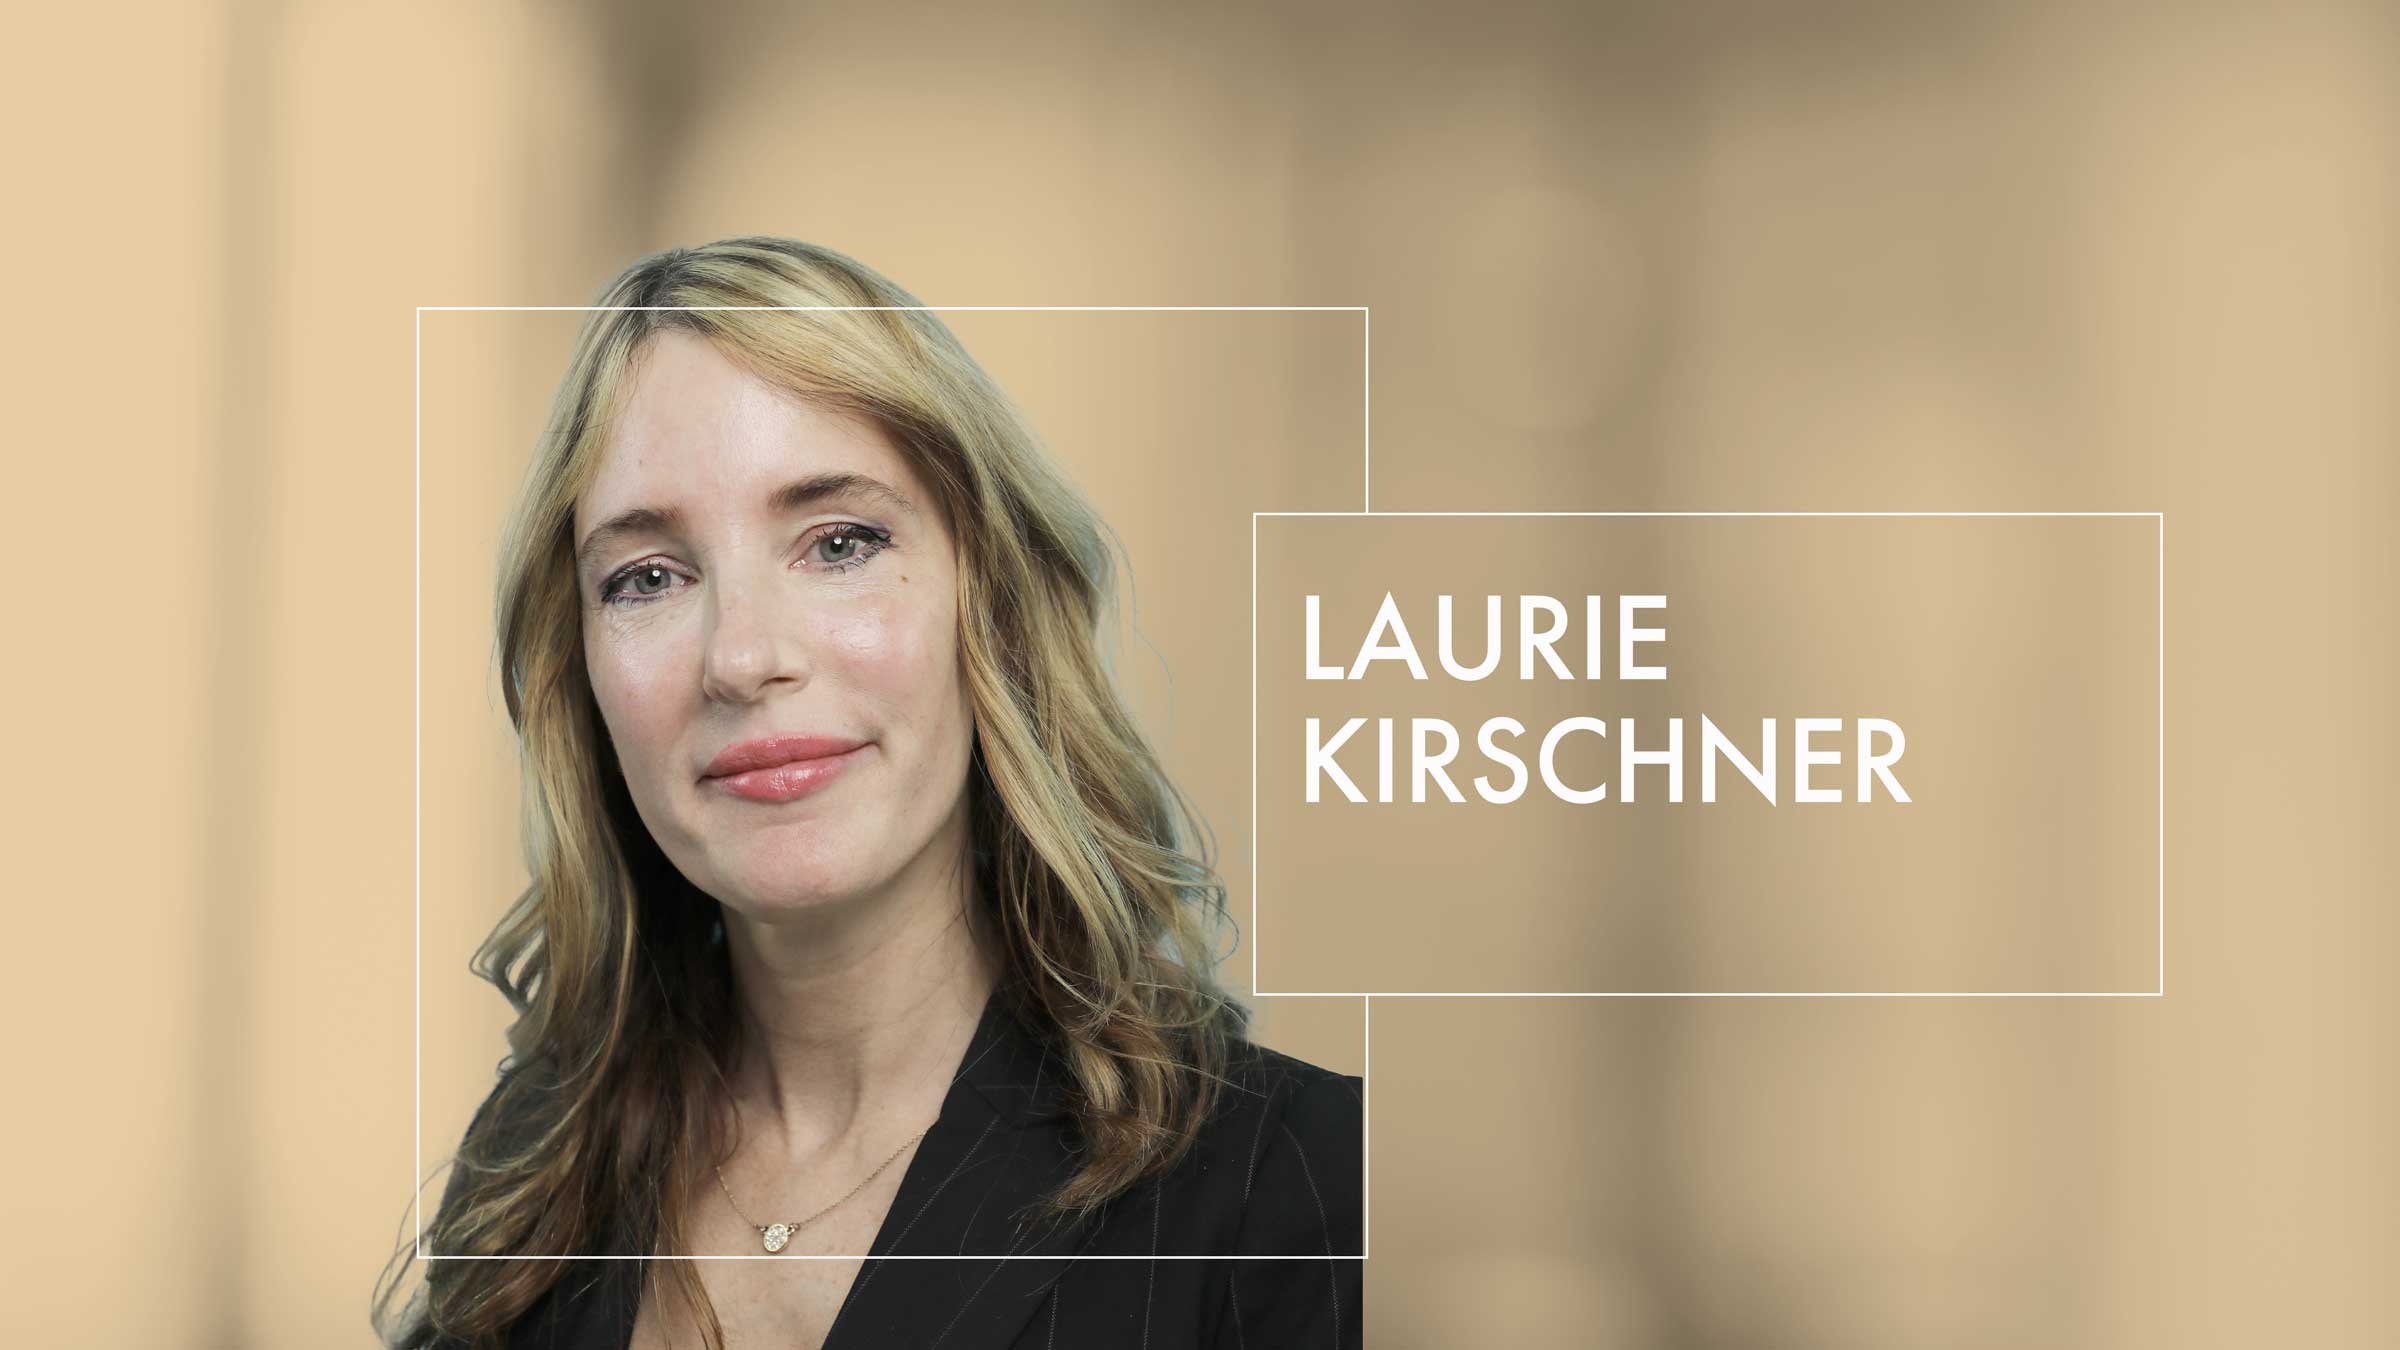 Laurie Kirschner